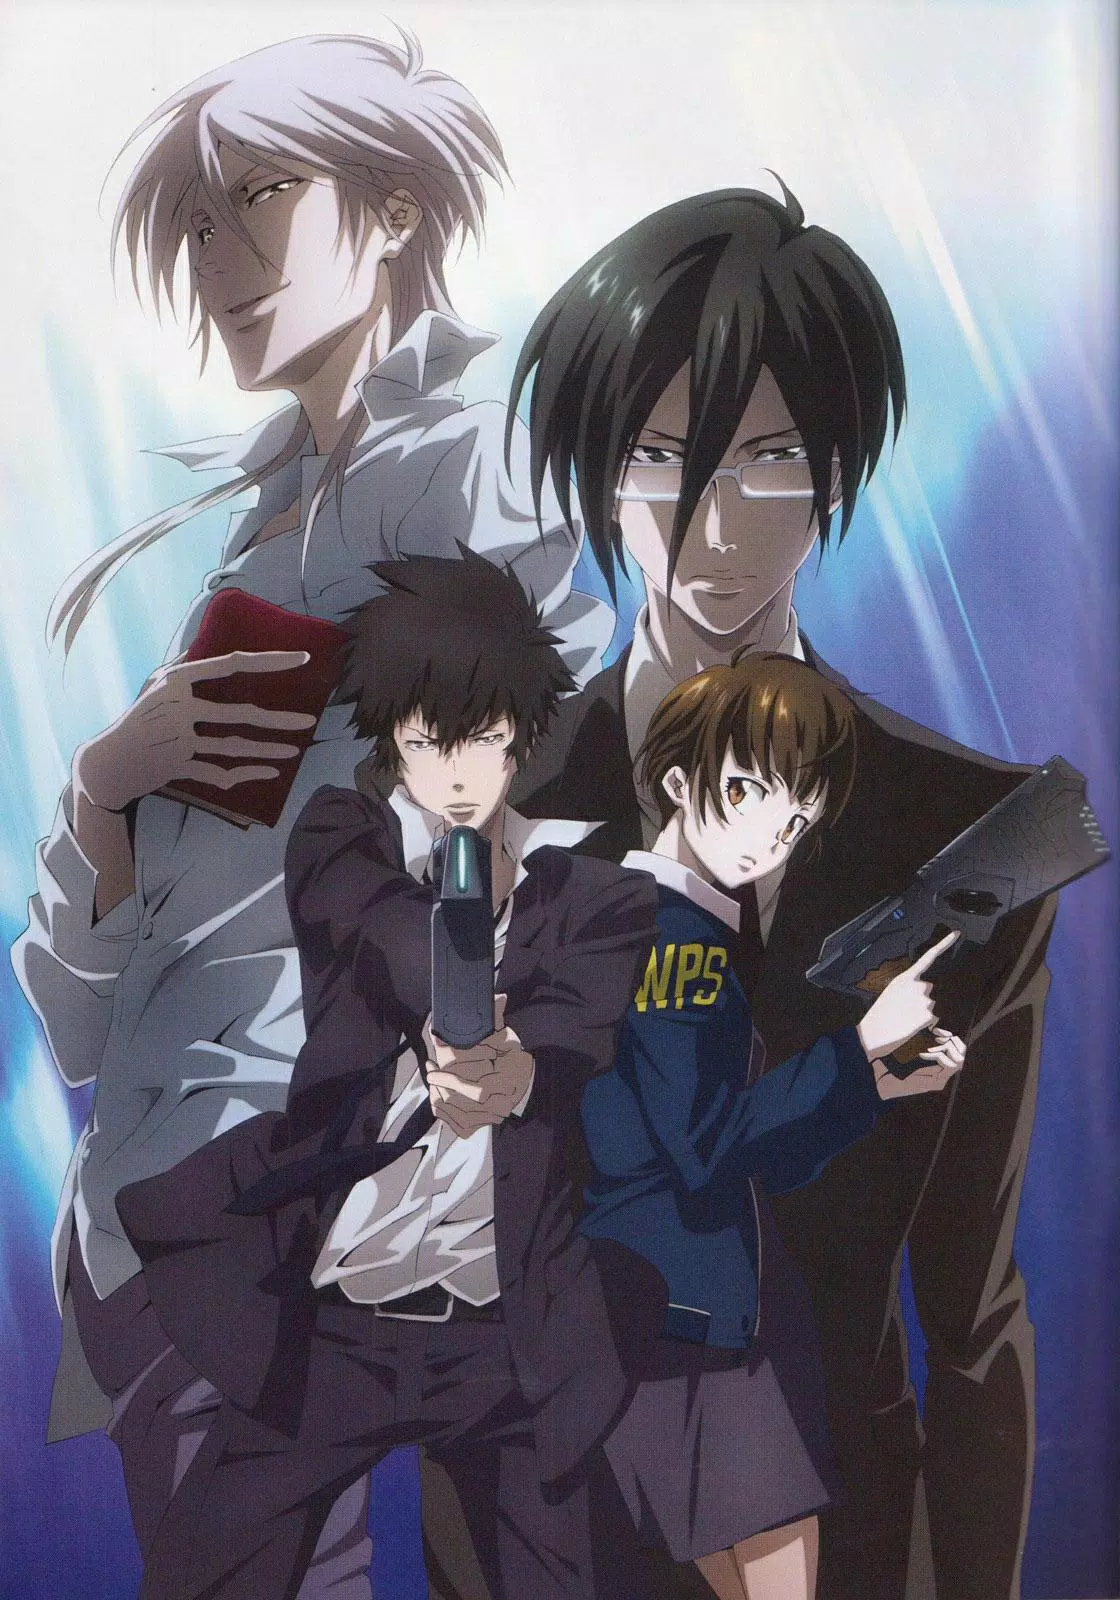 Psycho Pass Wallpaper Anime Apk For Android Download